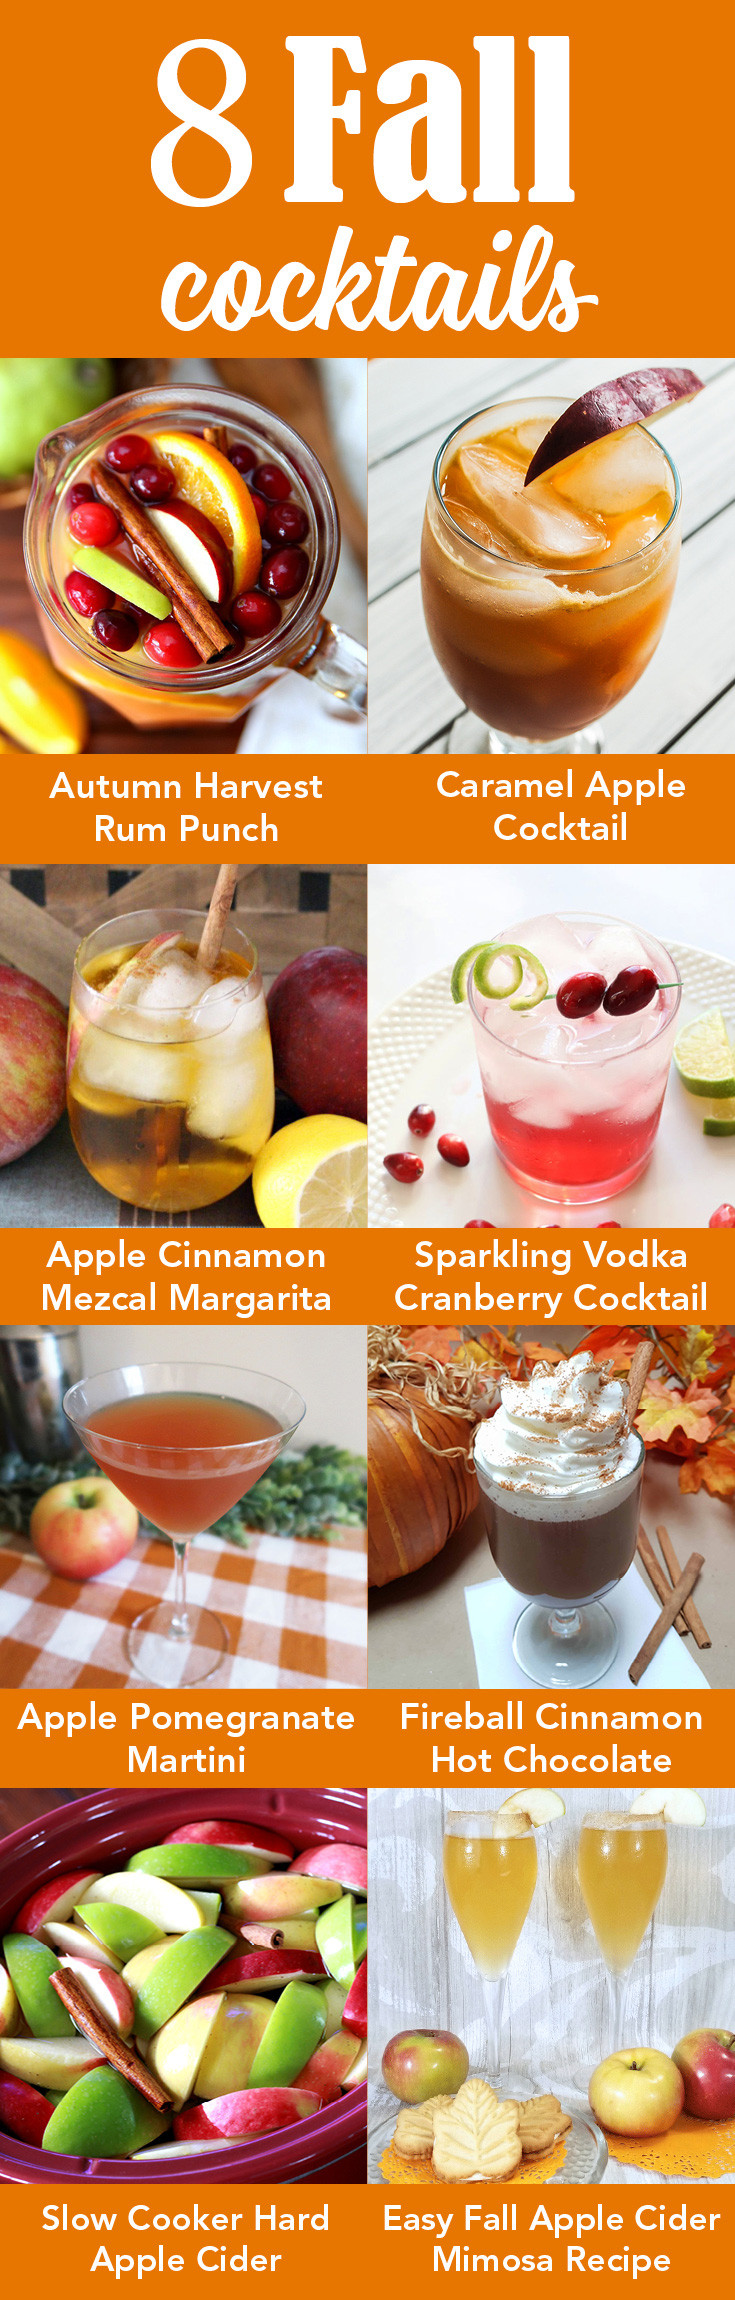 Rum Drinks For Fall
 Autumn Harvest Rum Punch The Best Fall Rum Punch